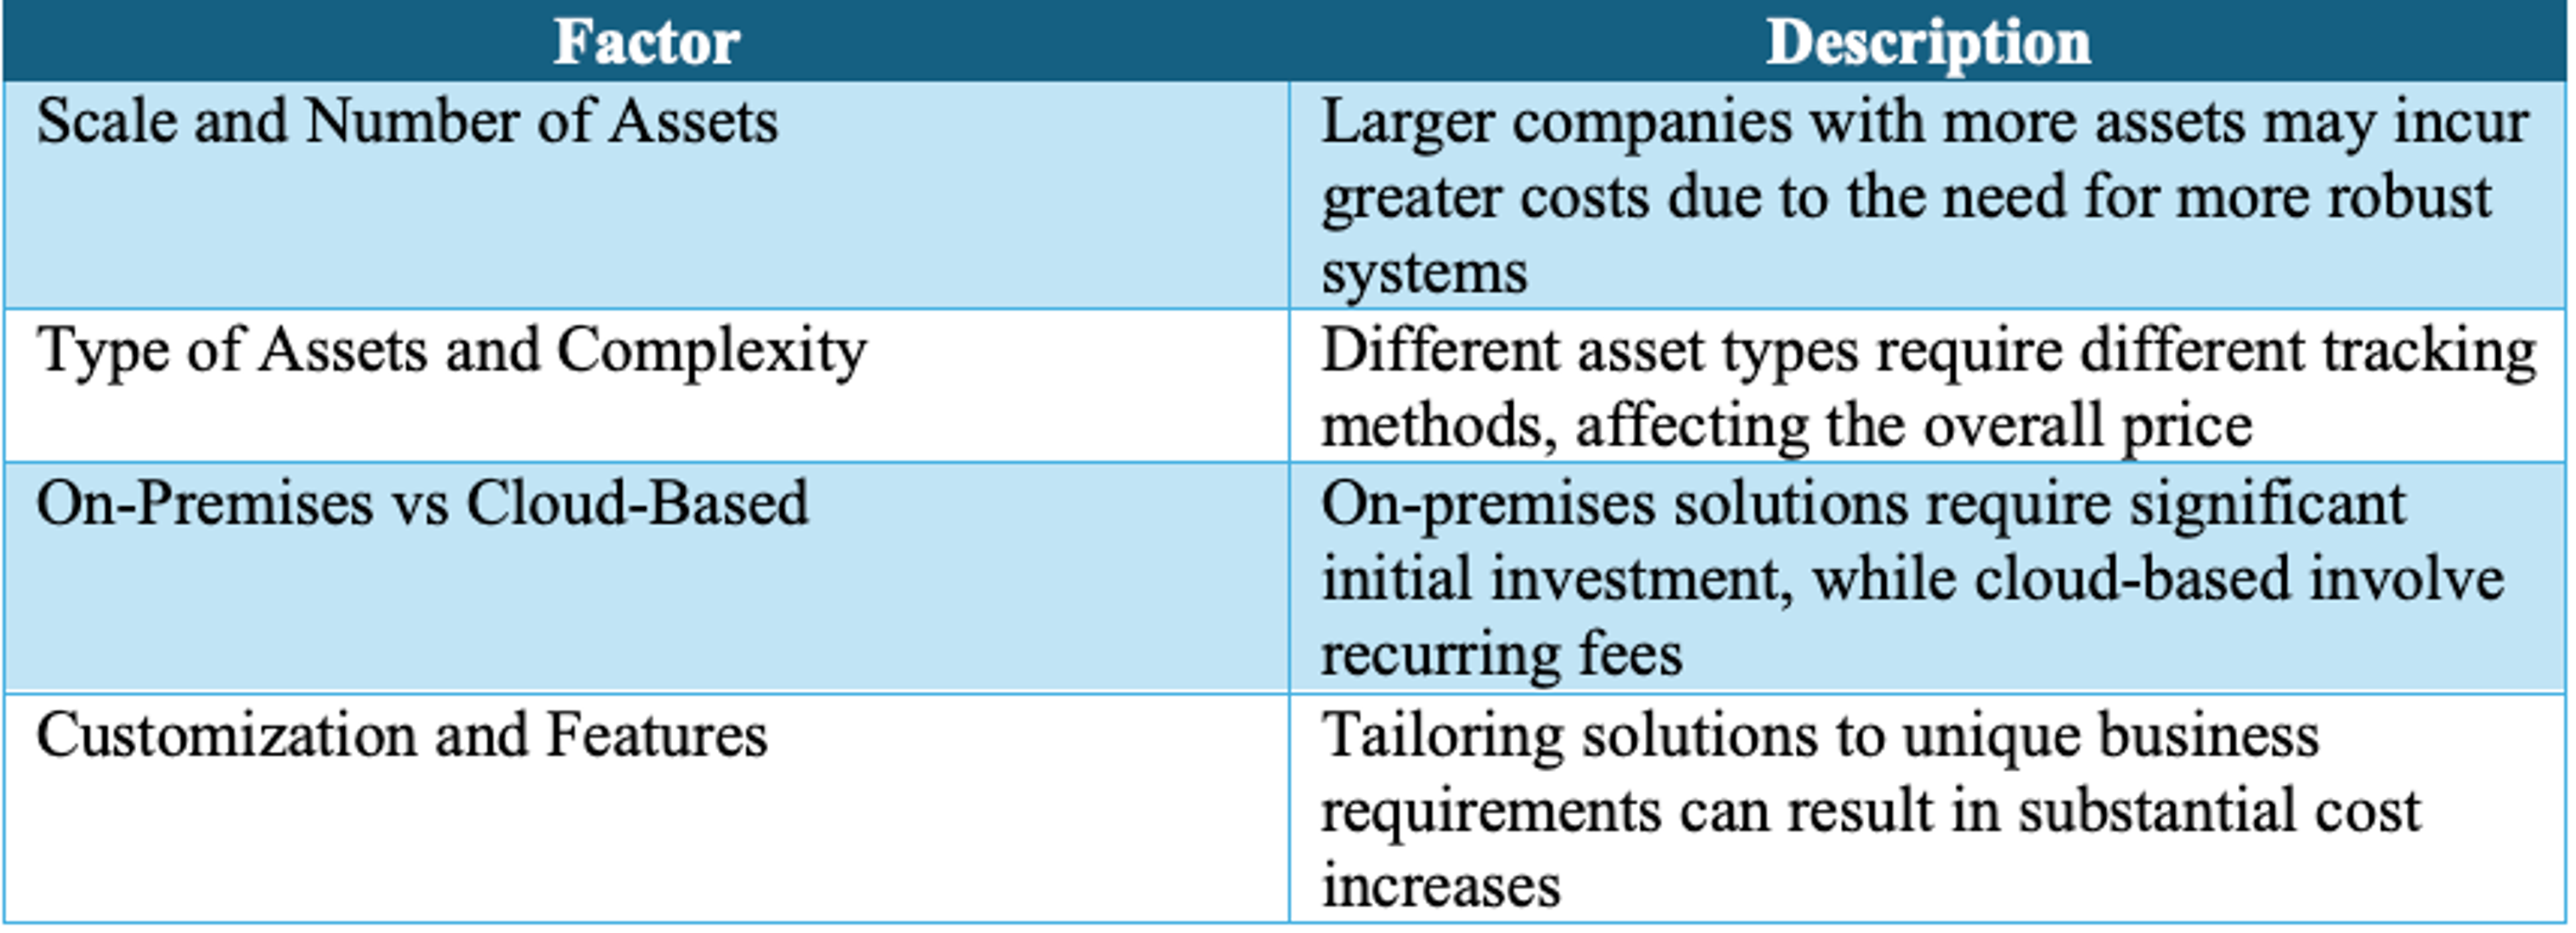 Key Factors Affecting Asset Tracking Costs